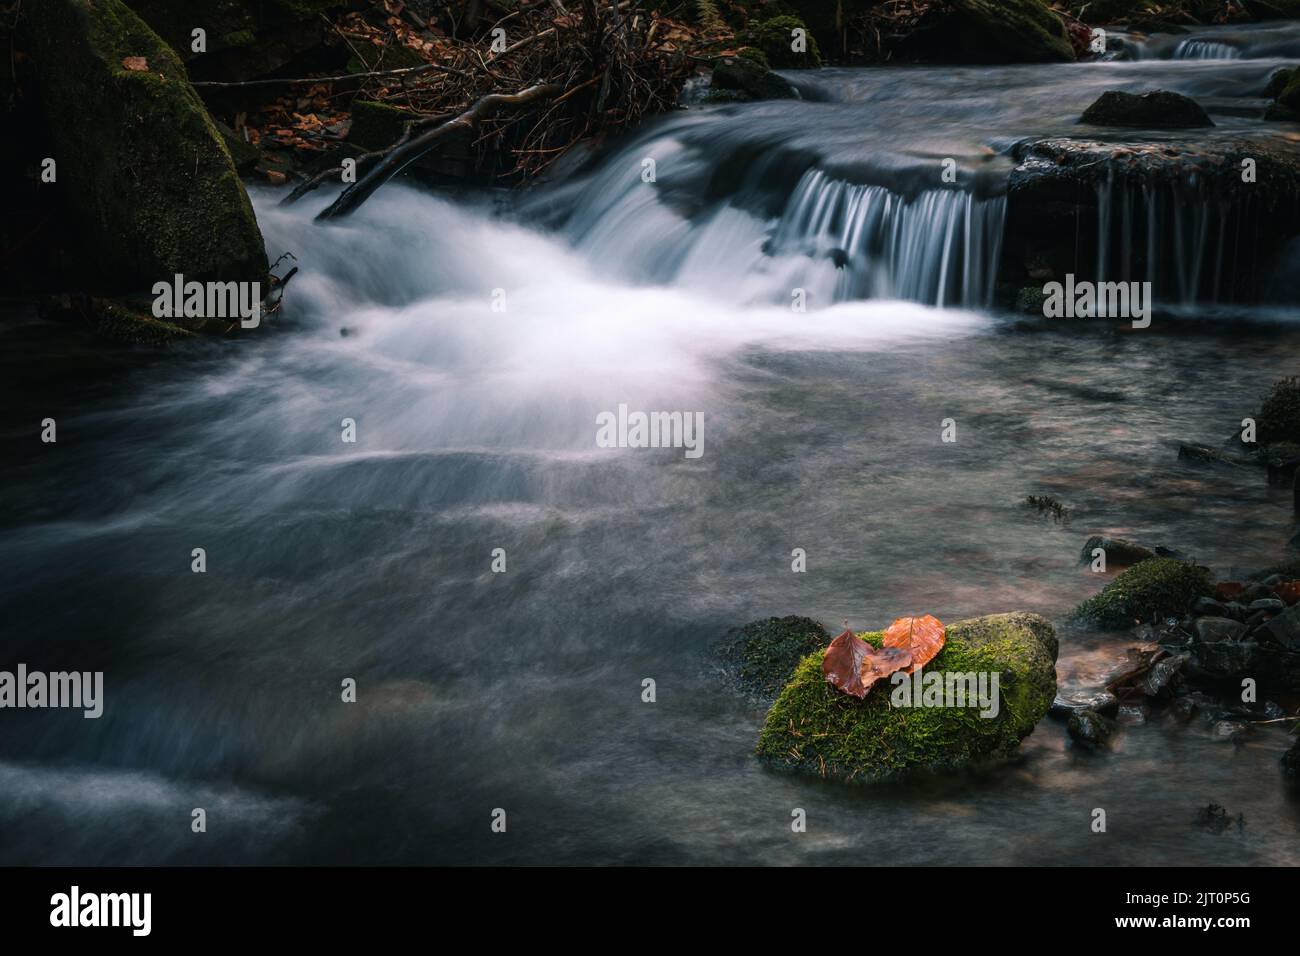 Water flowing in the Kytserov riverbed through the rocks creates small cascades around the banks, which are covered with colourful autumn leaves. Autu Stock Photo